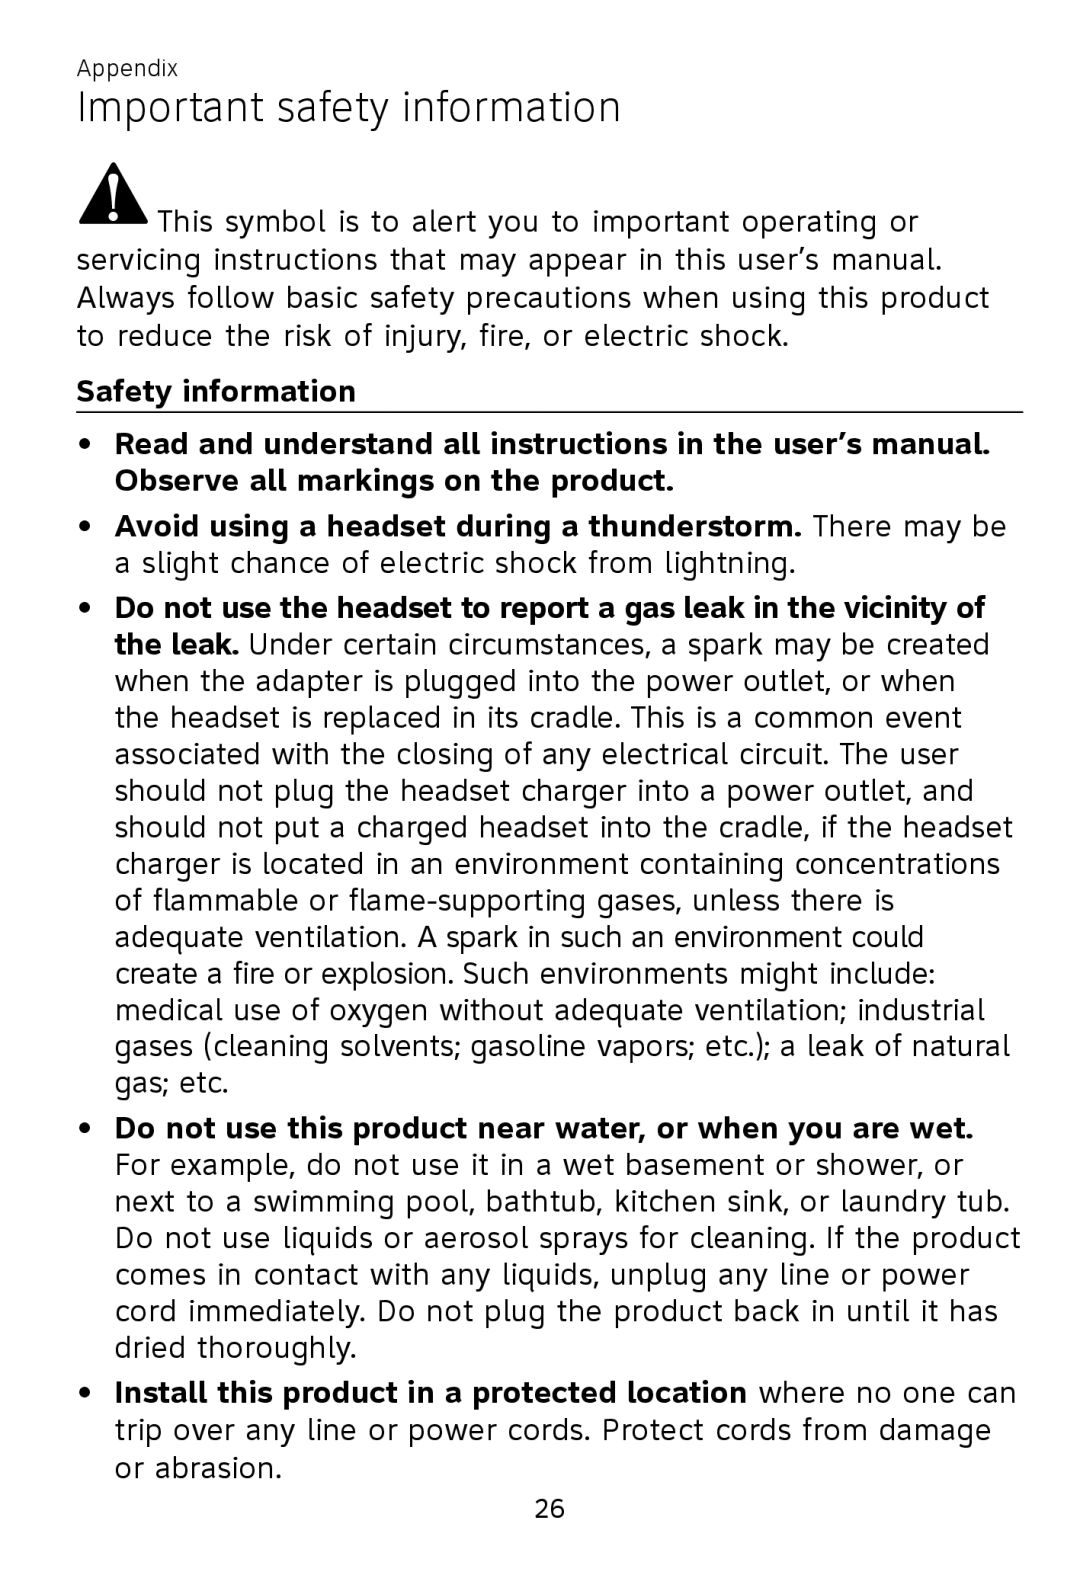 AT&T TL7700 user manual Important safety information, Safety information 